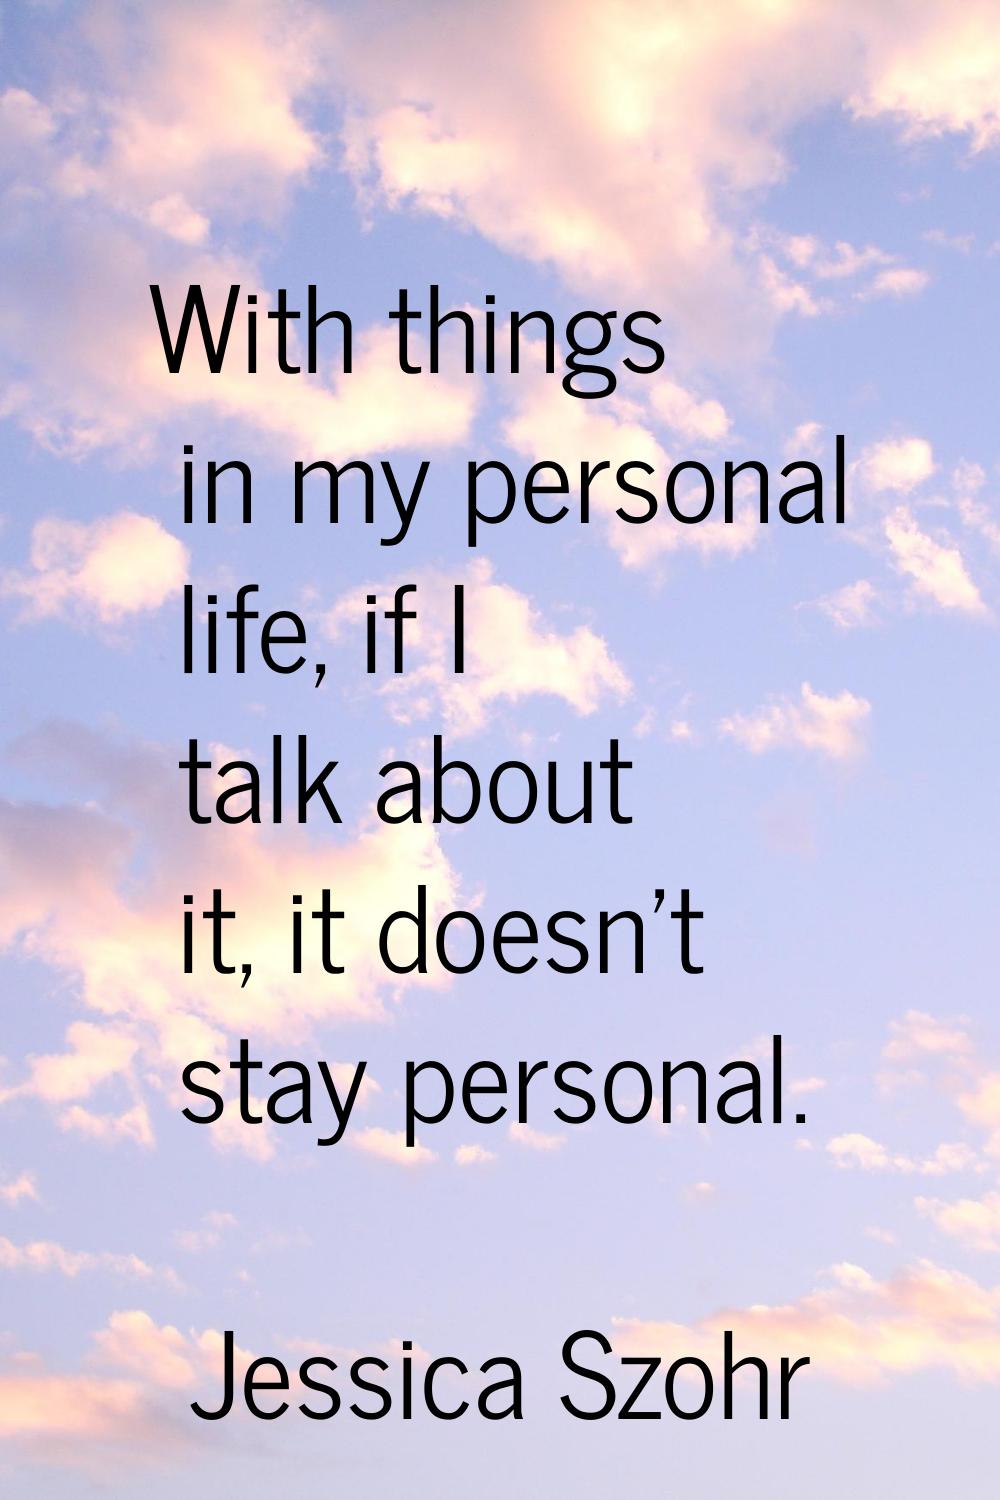 With things in my personal life, if I talk about it, it doesn't stay personal.